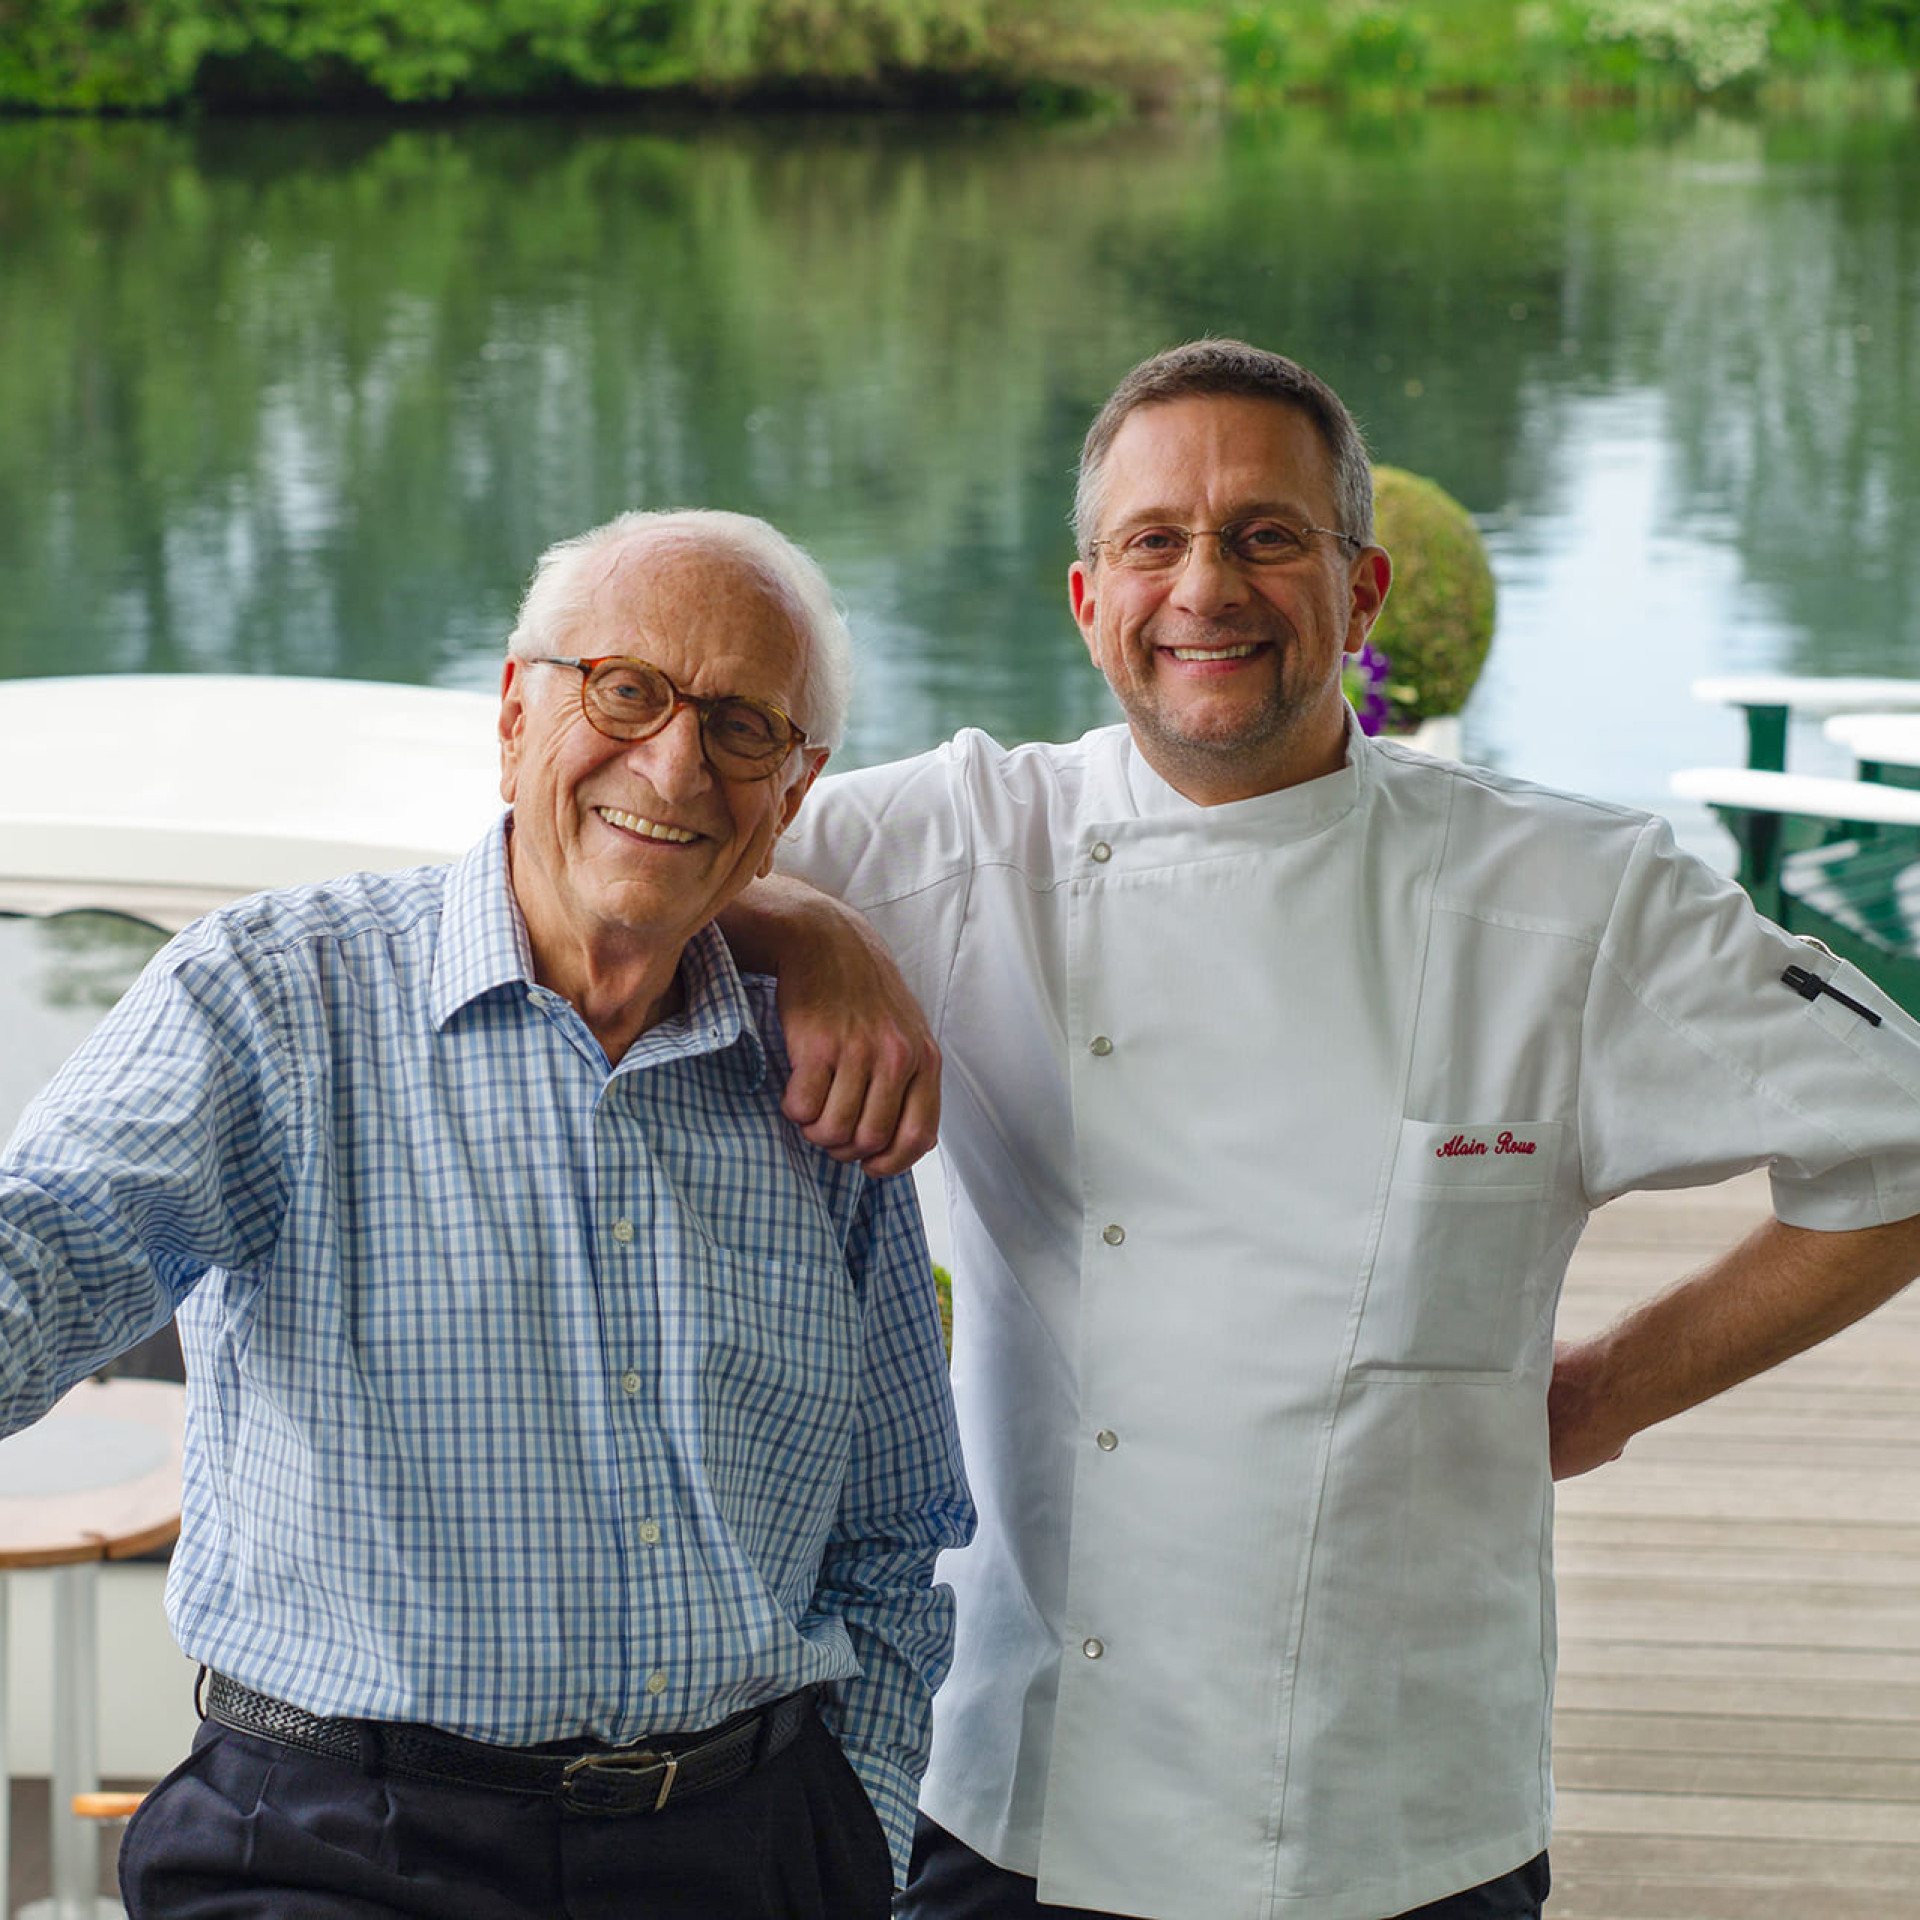 Michel Roux Sr, the famous starred Chef, renewed his trust in EuroCave - Photo: Michel Roux and his son, Alain Roux